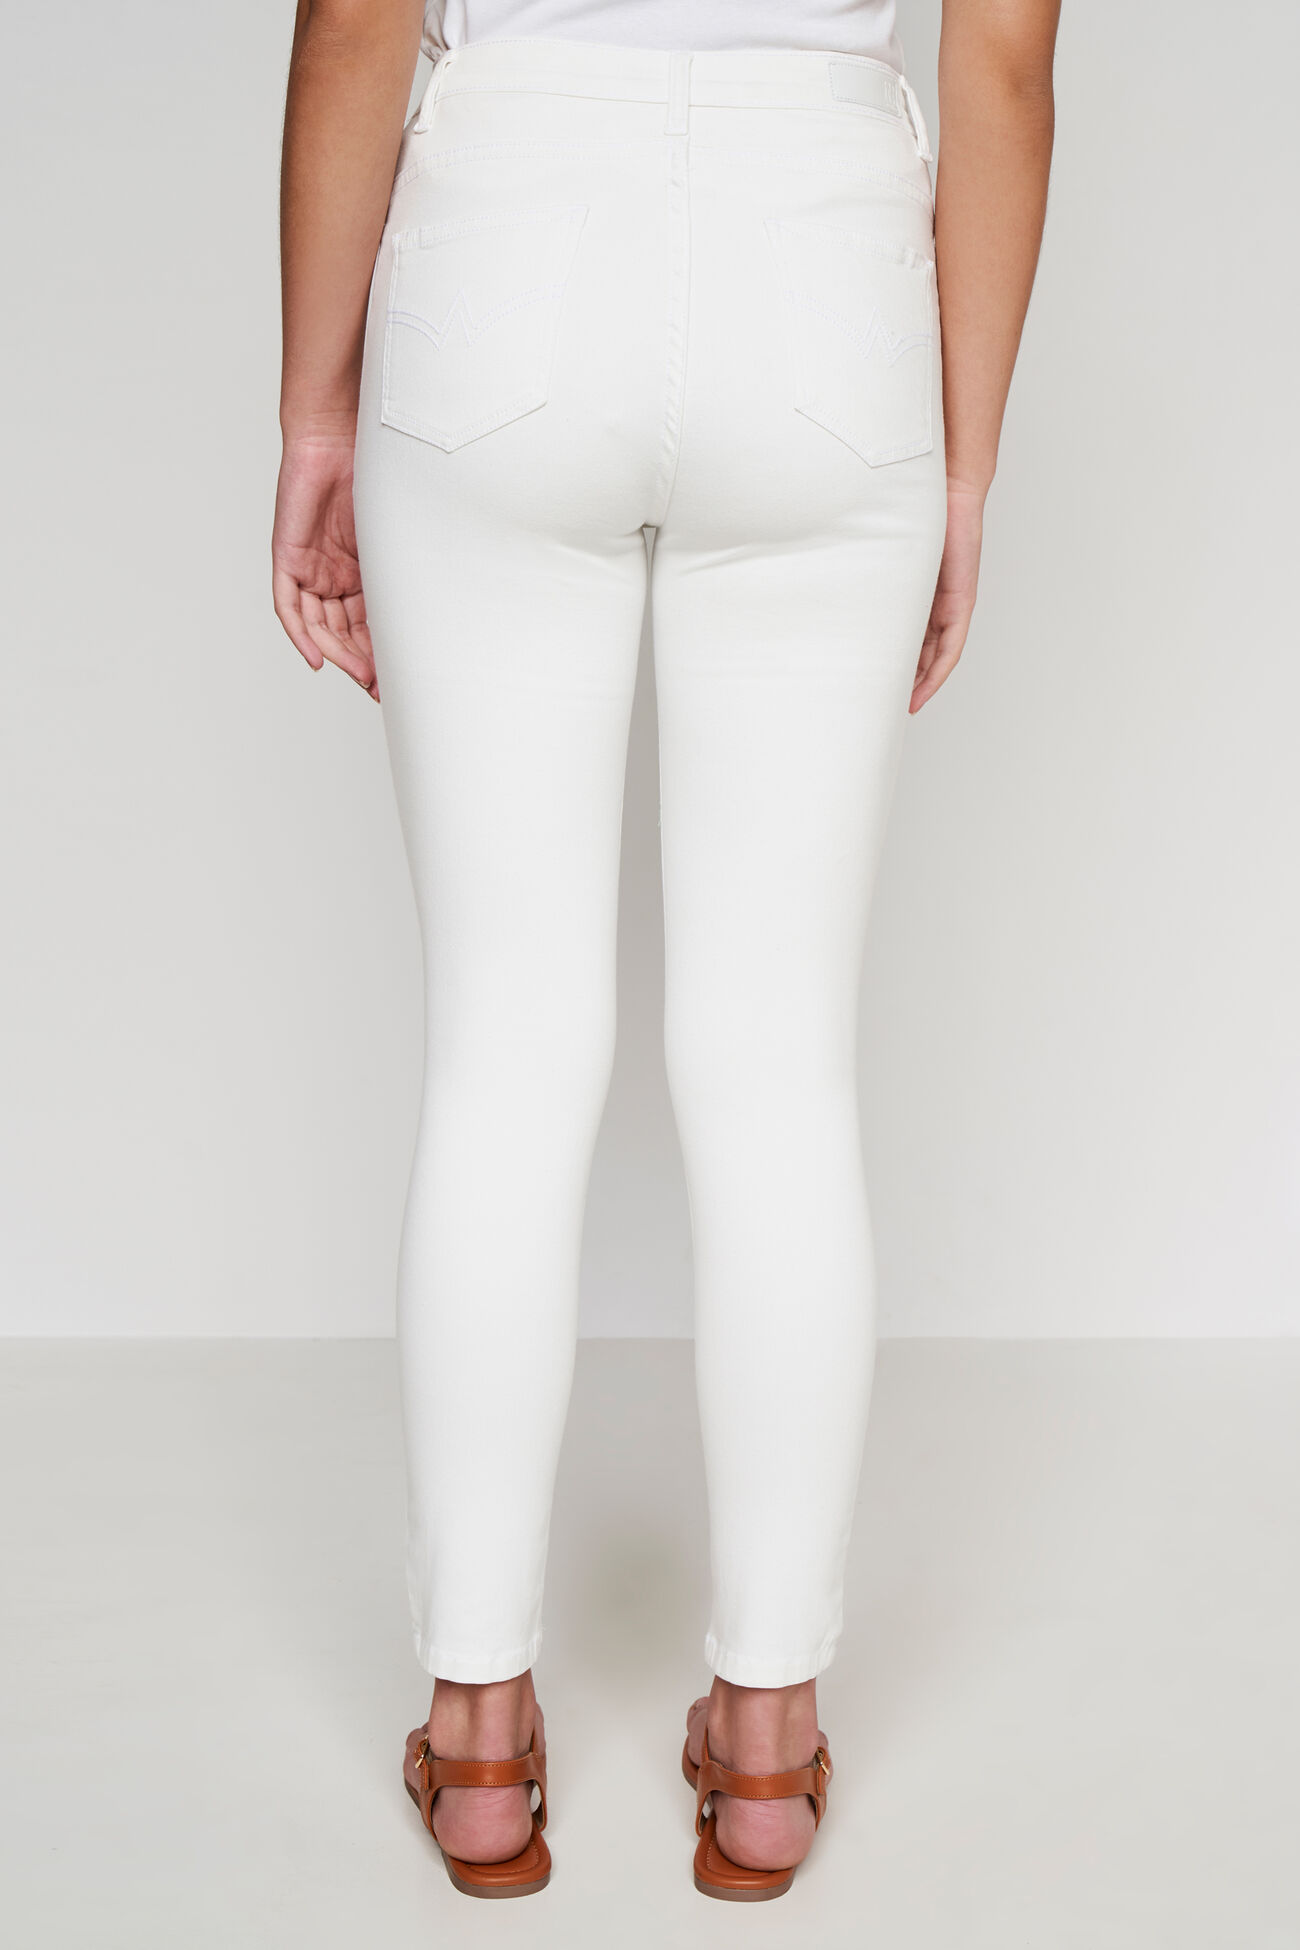 White Solid Casual Bottom, White, image 4